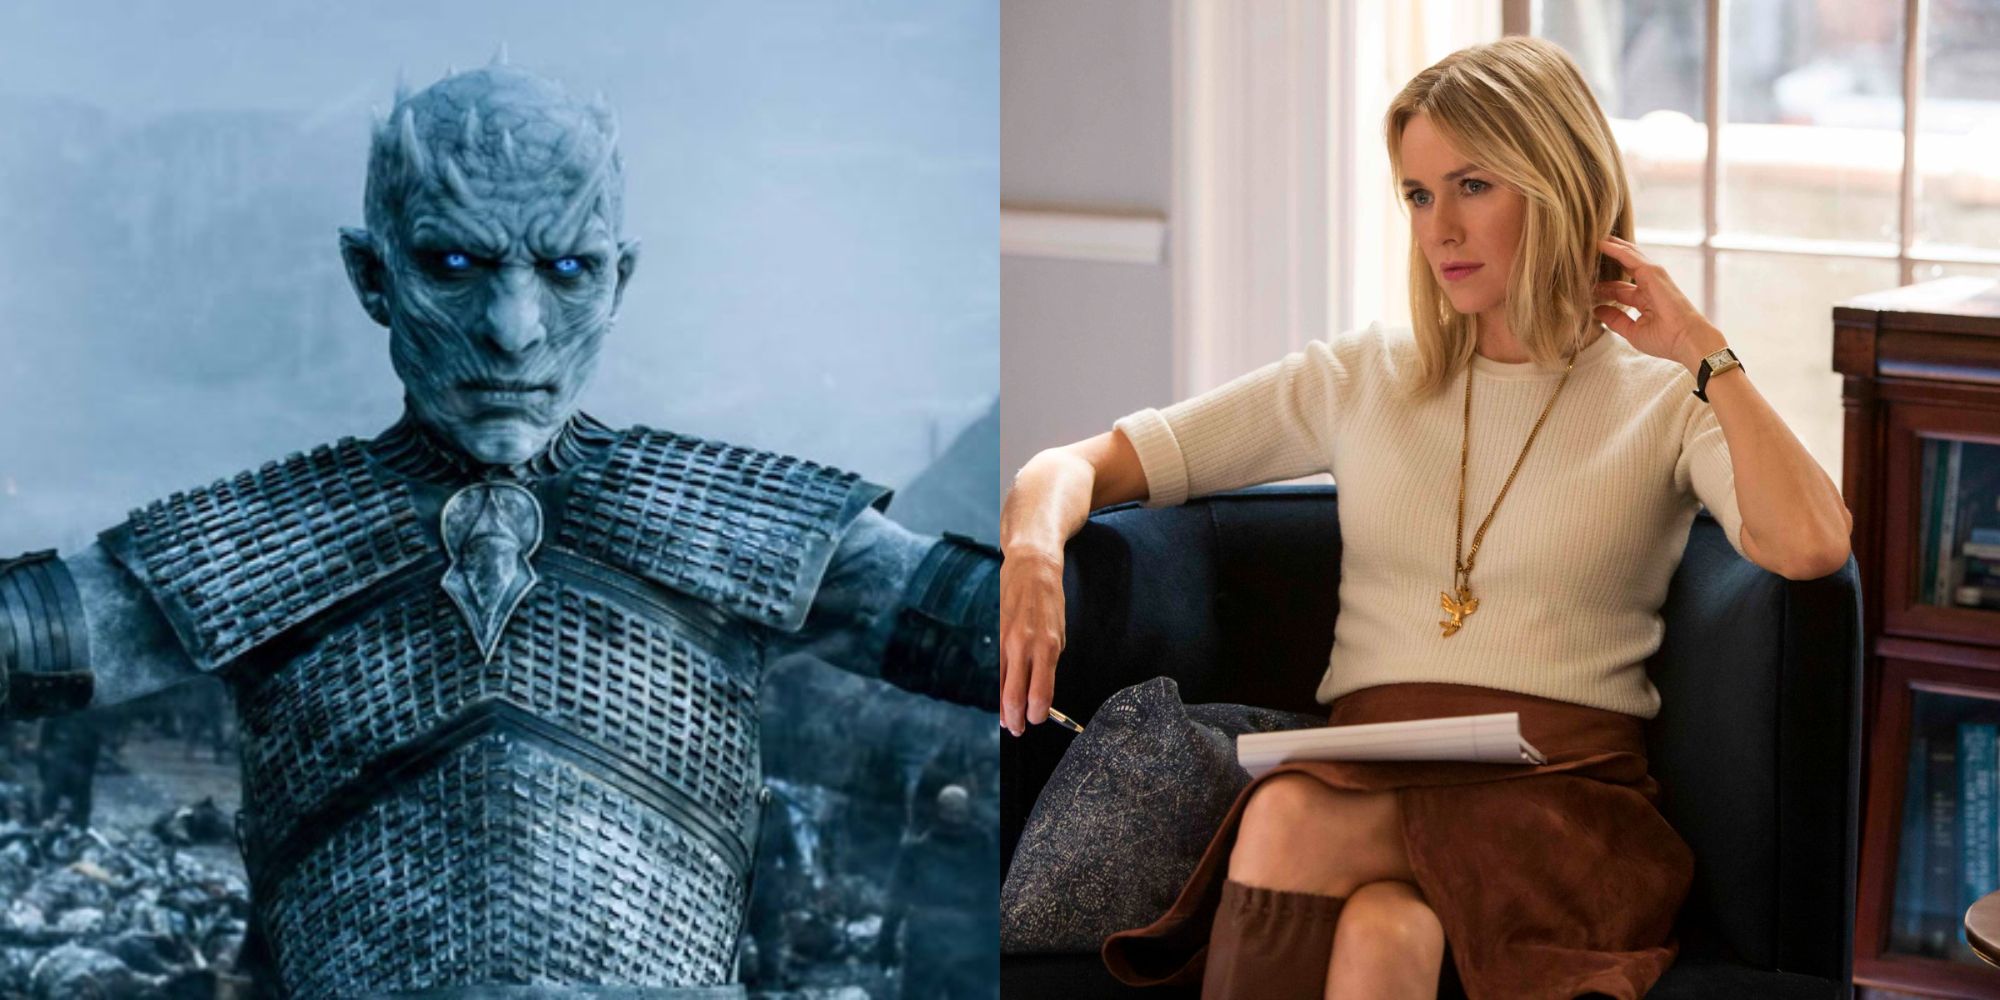 Split image showing The Night King in Game of Thrones and Naomi Watts in Gypsy